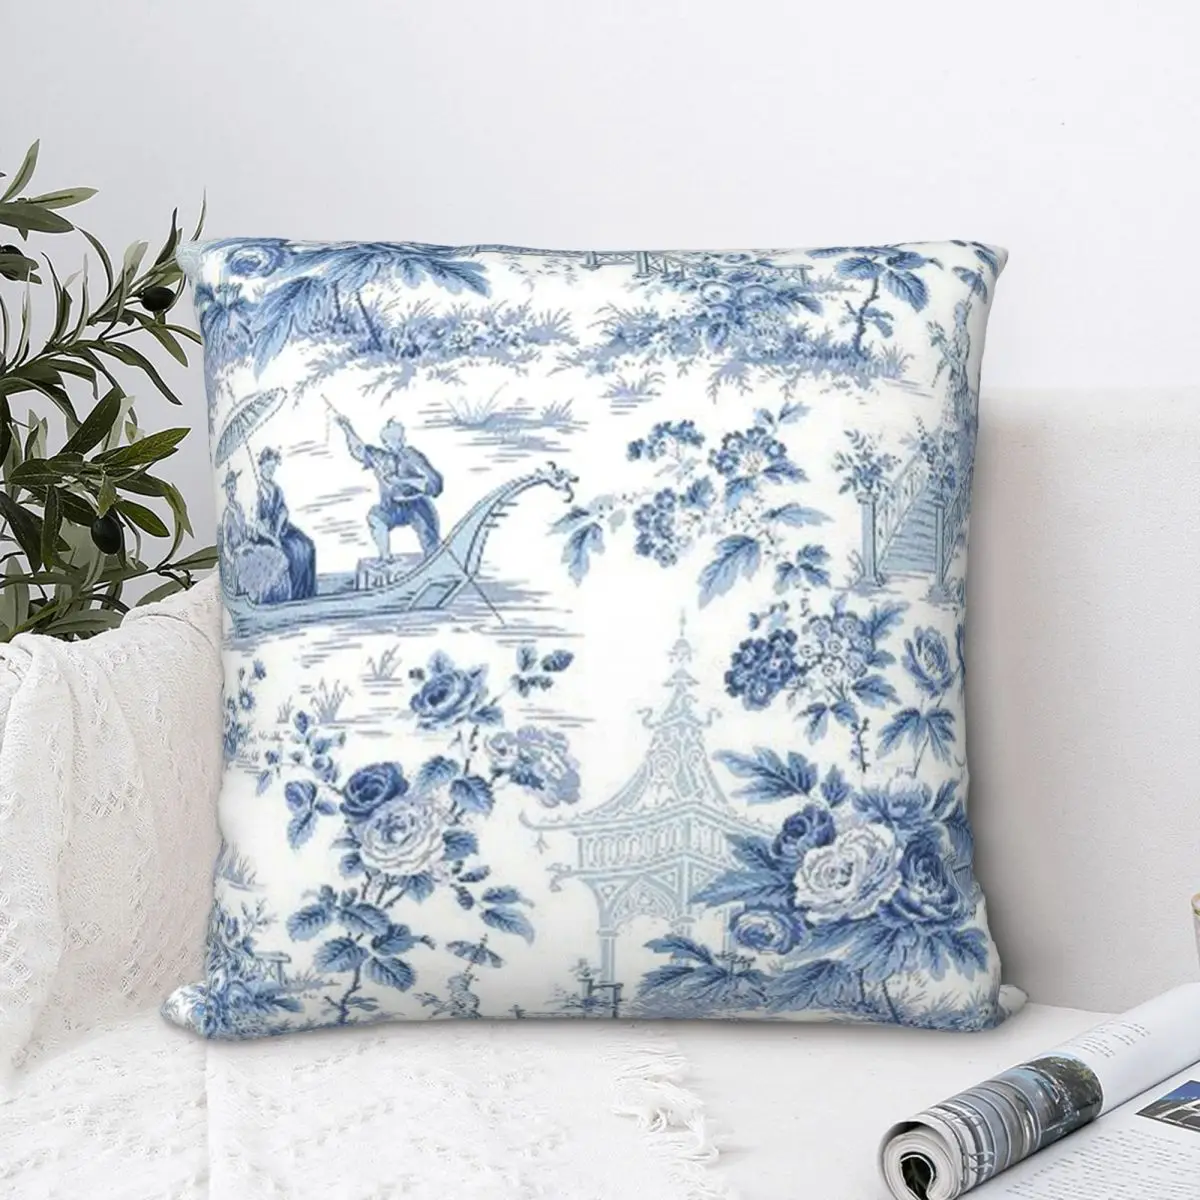 

Powder Blue Chinoiserie Toile Square Pillowcase Cushion Cover funny Zip Home Decorative Polyester Throw Pillow Case Room Nordic